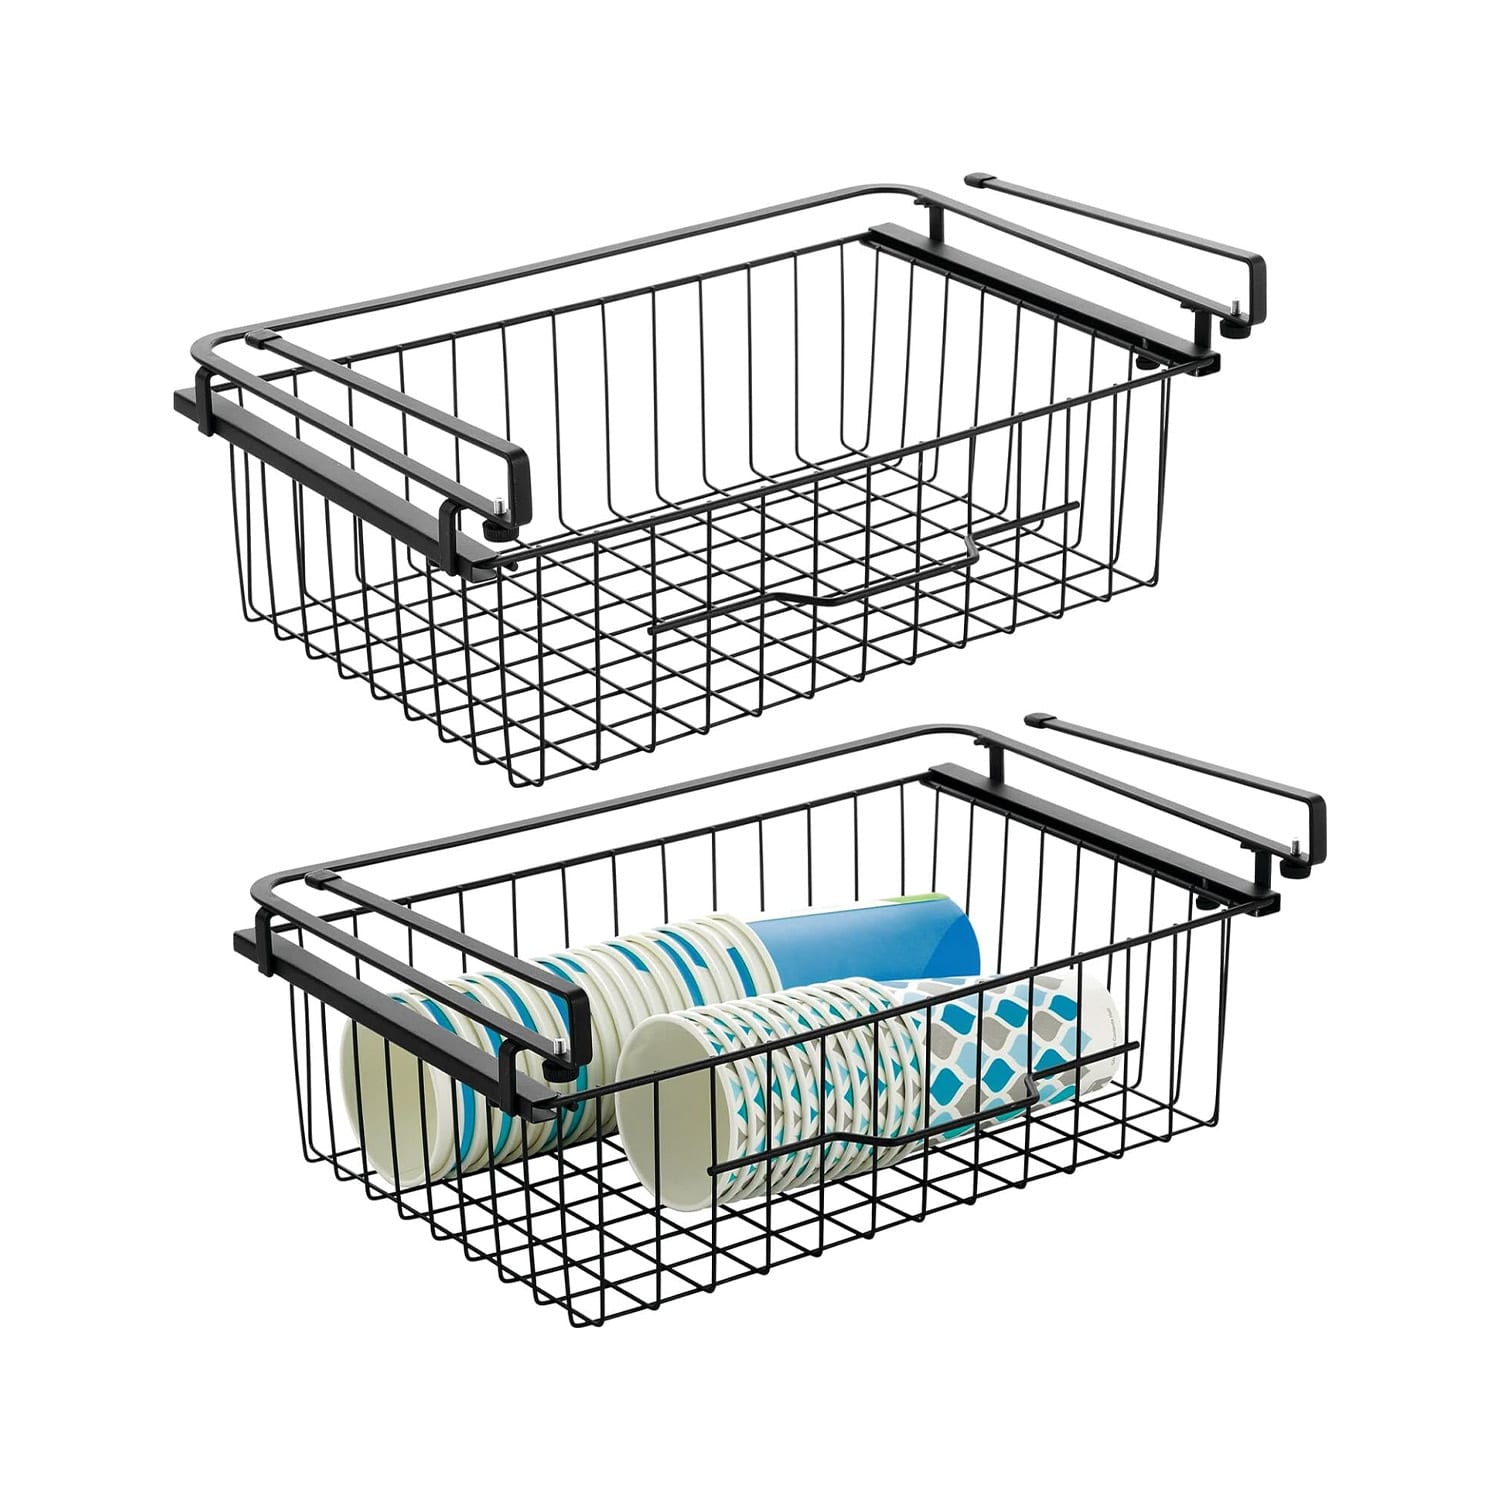 http://cdn.apartmenttherapy.info/image/upload/v1698174025/commerce/gift-guides/2023-10-27/pullout-drawer-basket.jpg